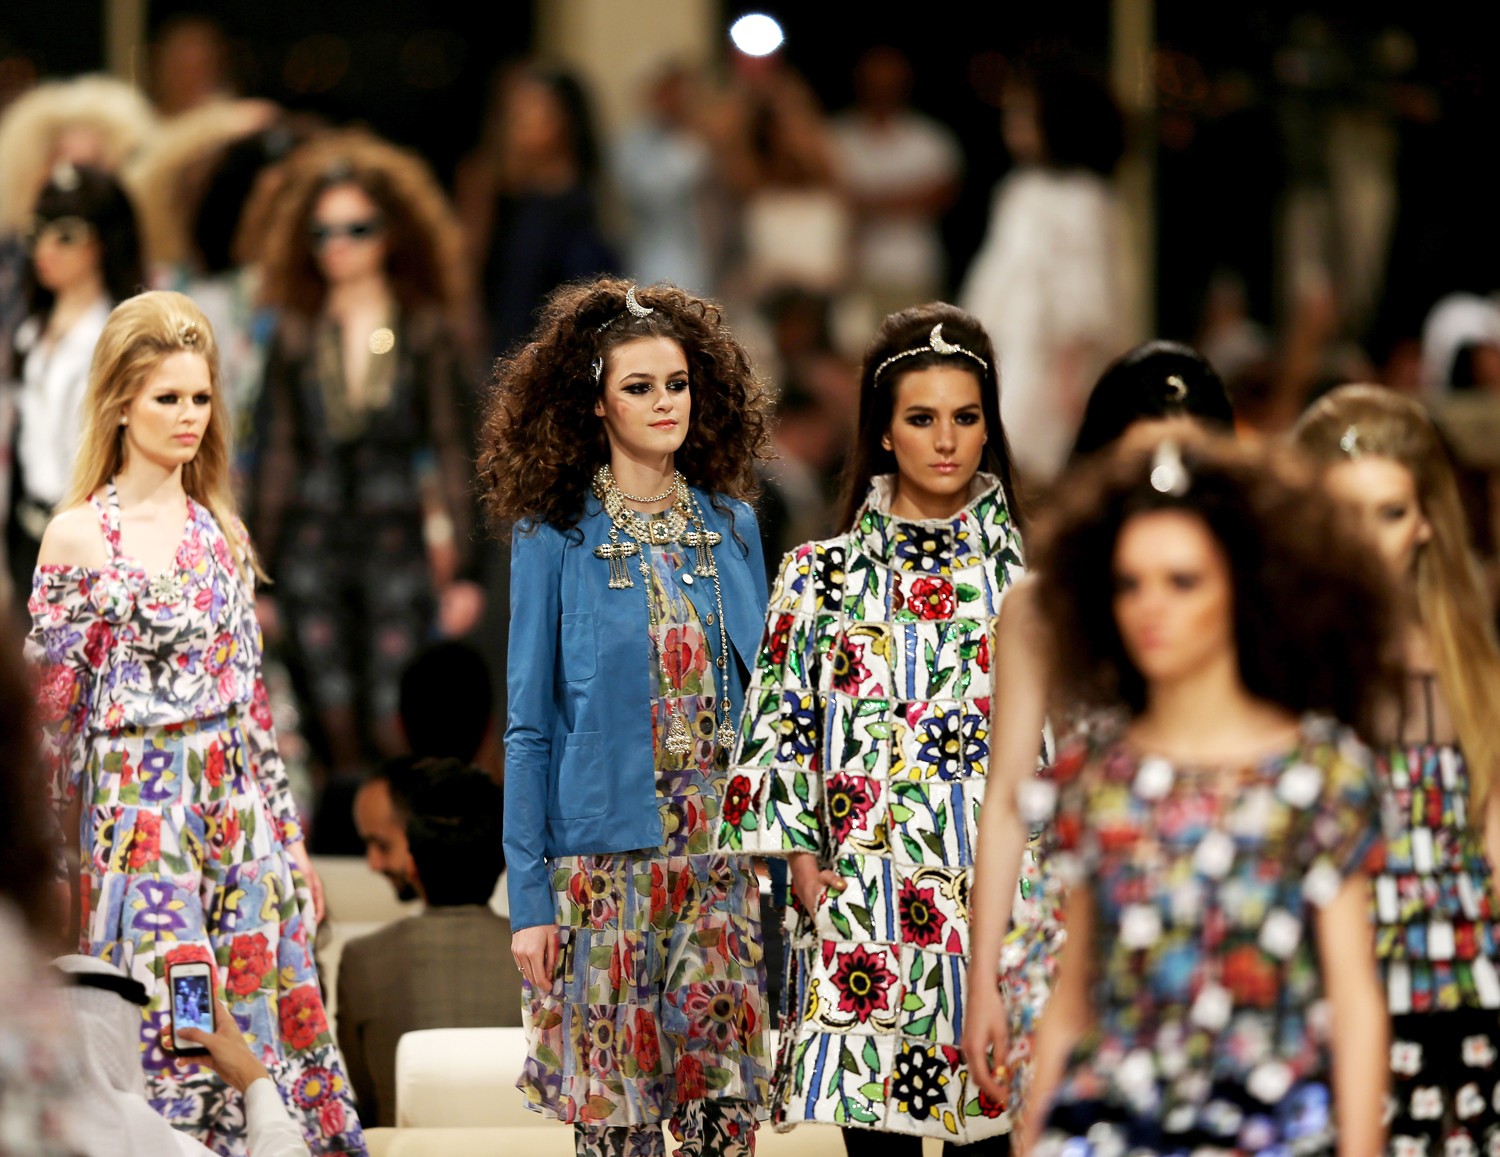 DUBAI, UNITED ARAB EMIRATES - MAY 13:  Models walk the runway at the Chanel Cruise Collection 2014/2015 at The Island on May 13, 2014 in Dubai, United Arab Emirates.  (Photo by Francois Nel/Getty Images) (Foto: Getty Images)